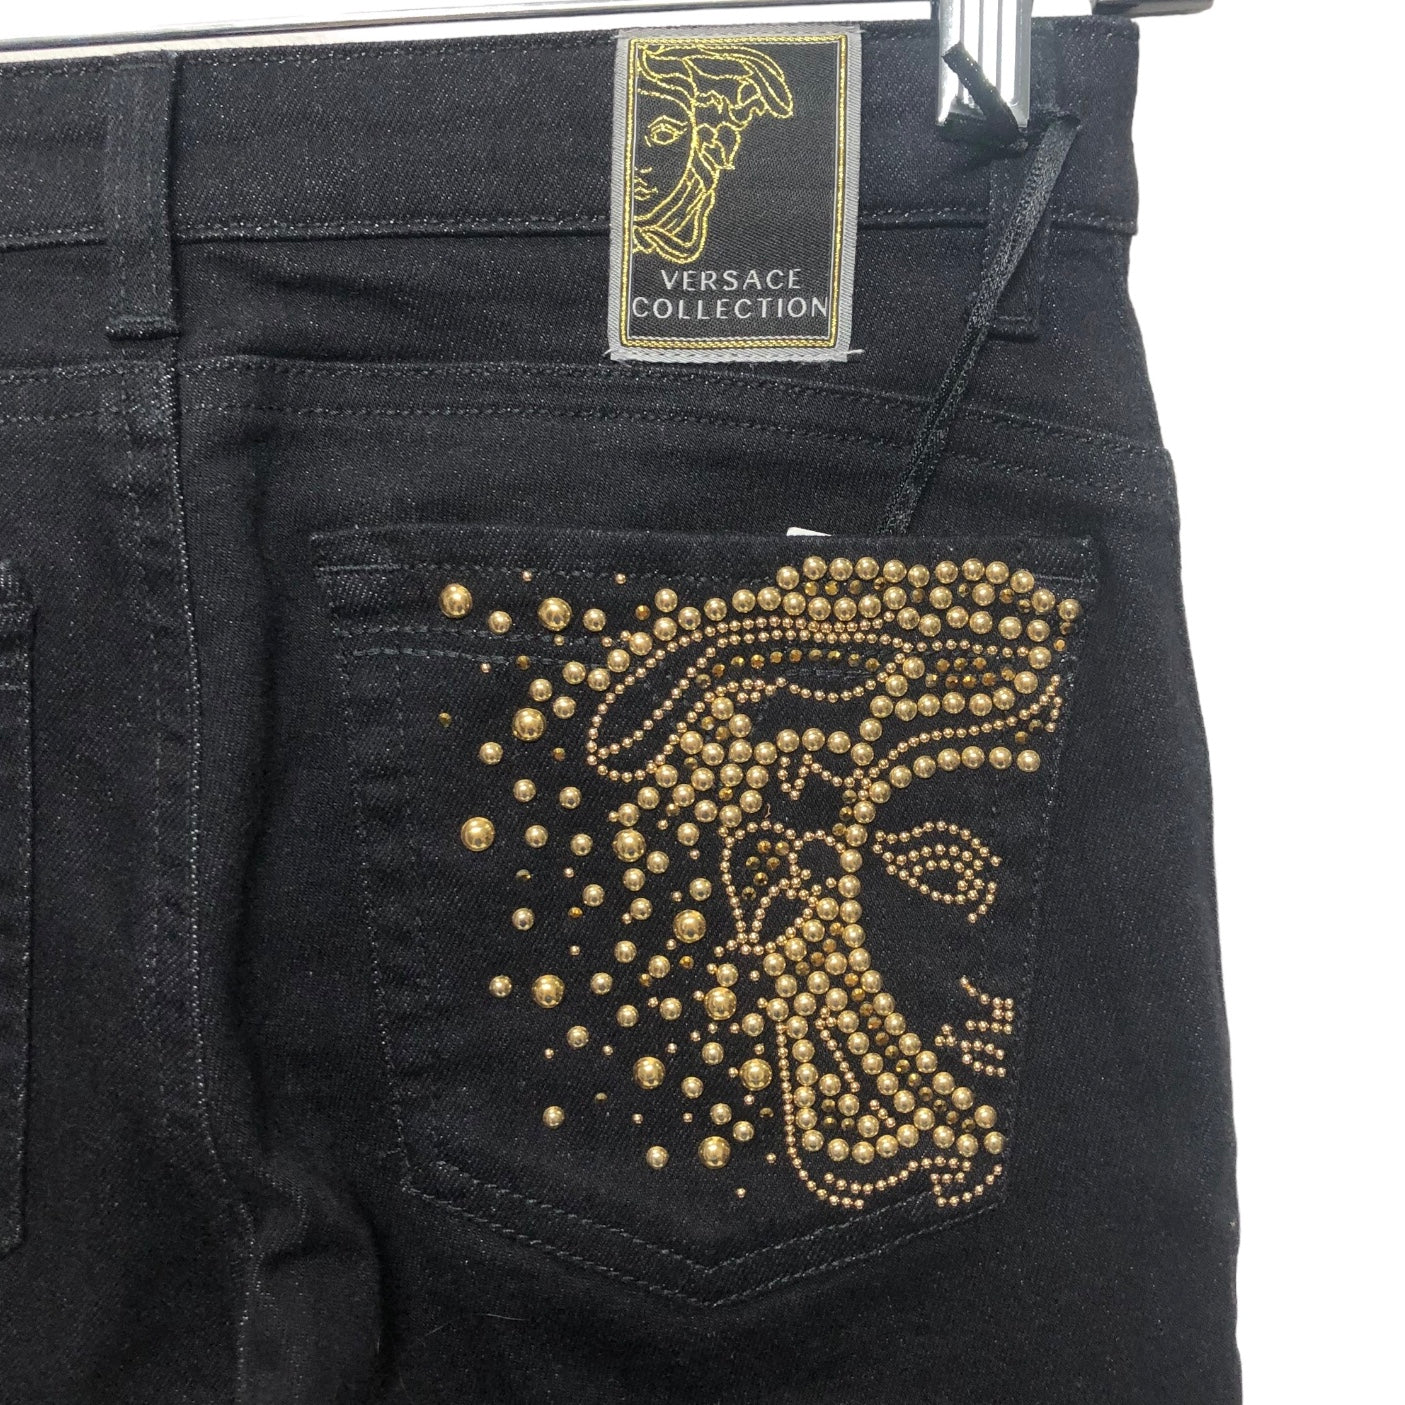 Jeans Luxury Designer By Versace  Size: 0